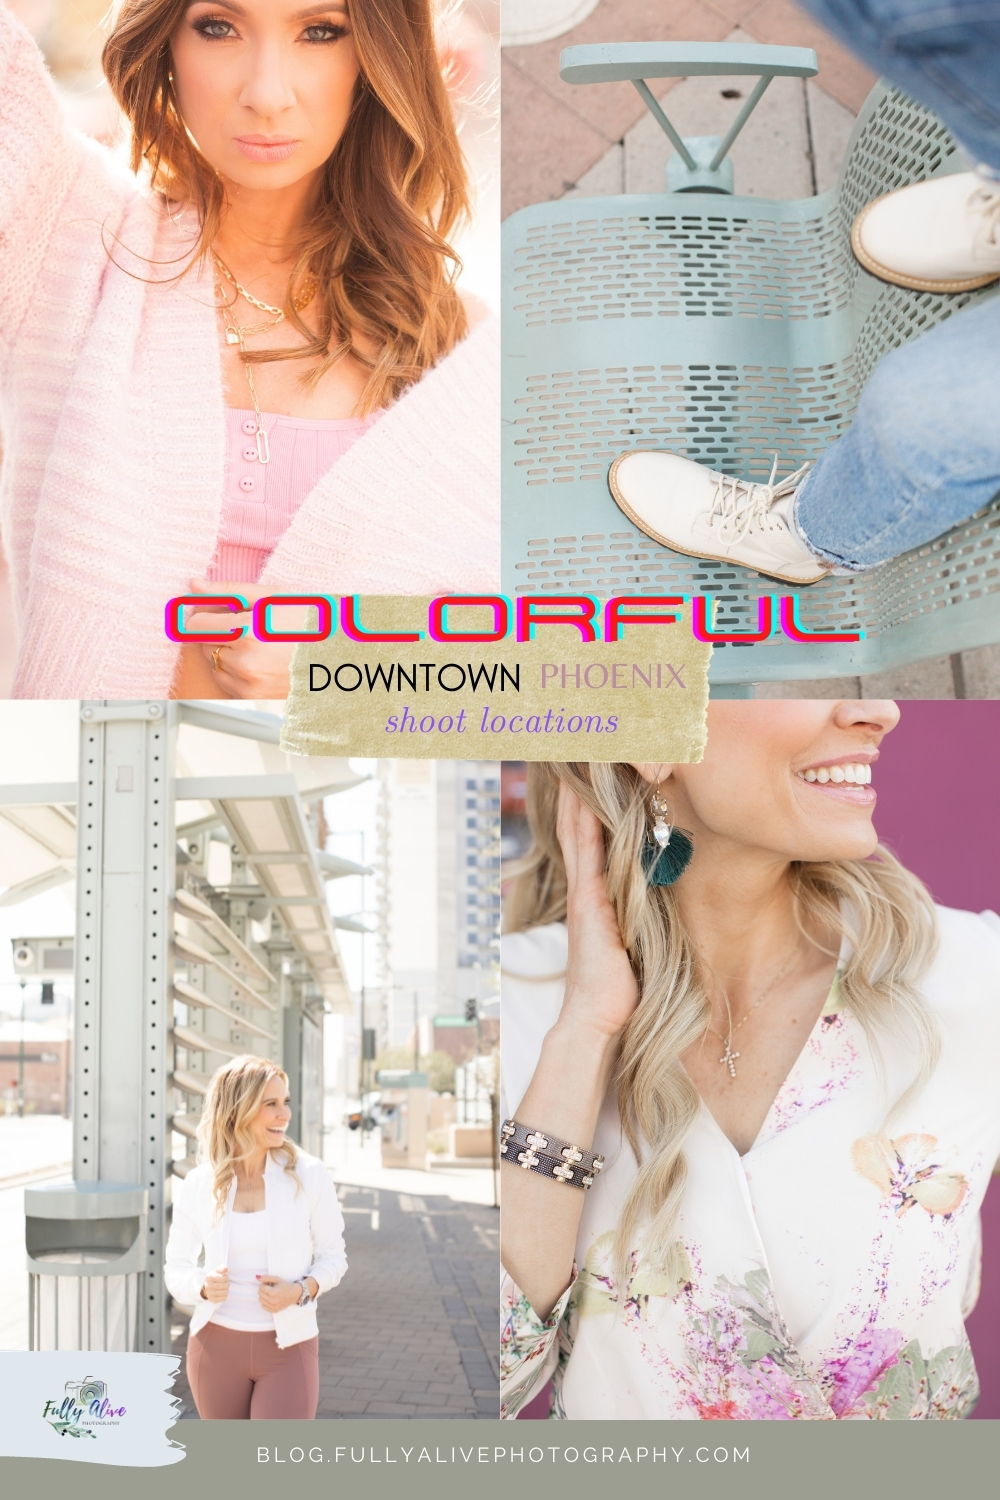 Colorful Downtown Phoenix Shoot Locations